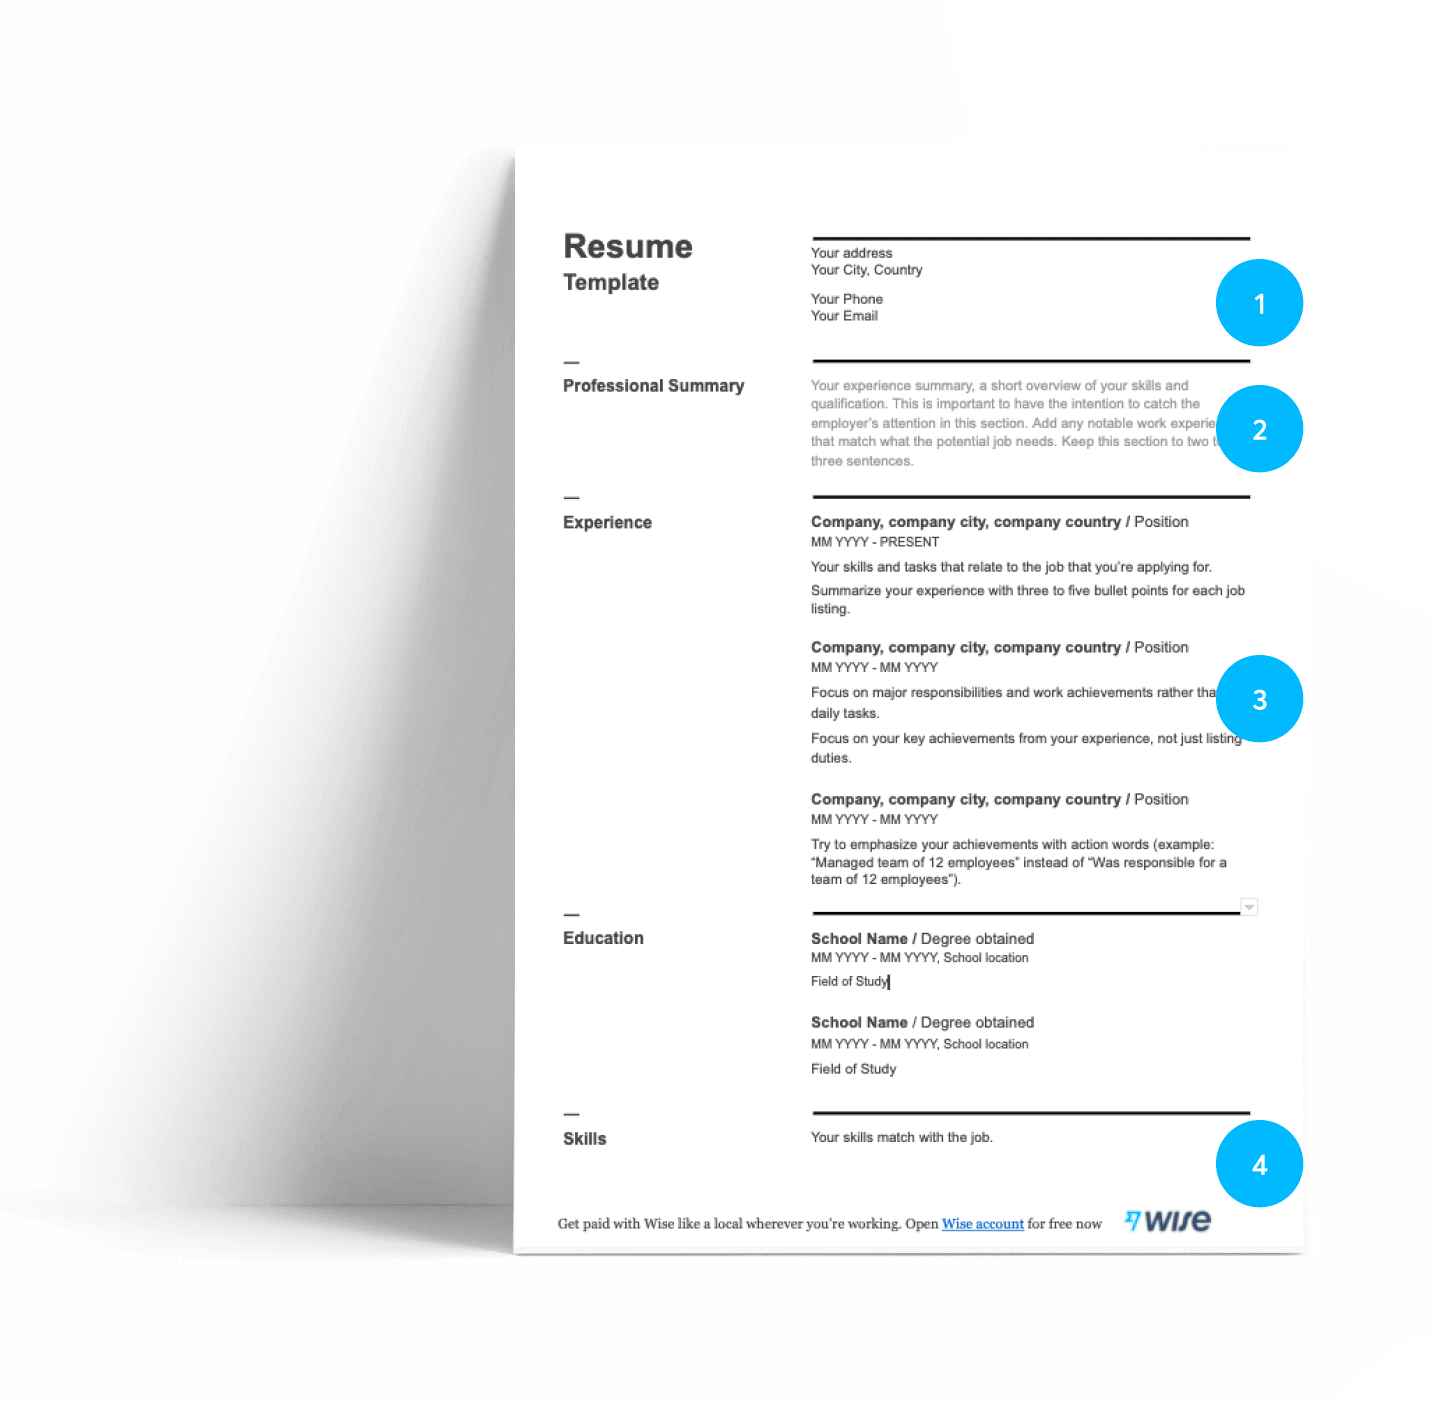 How to write a a sales & marketing resume?